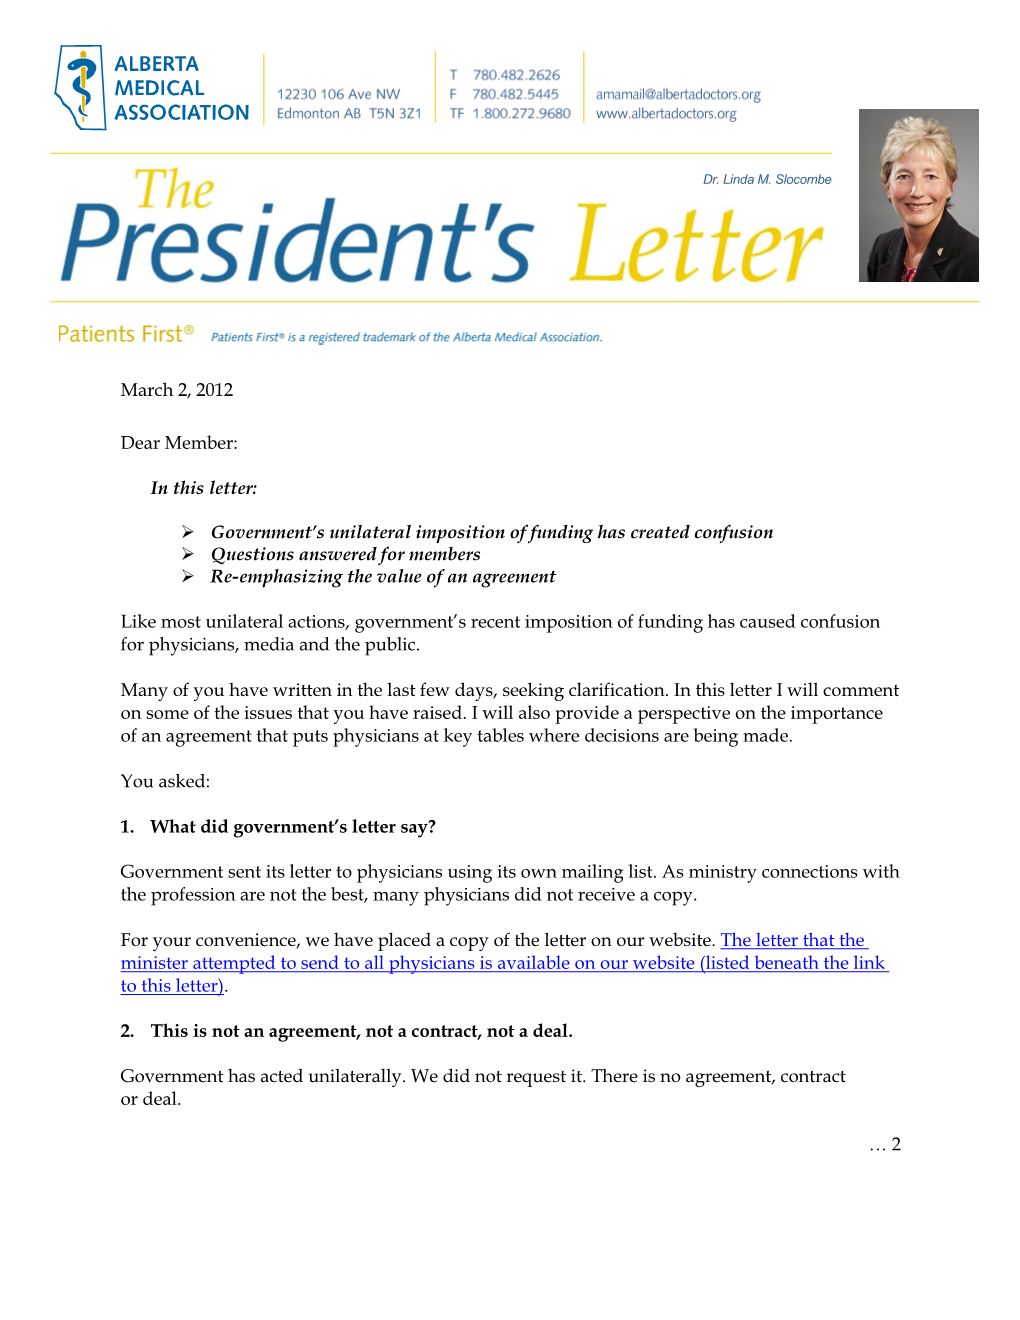 March 2, 2012 Dear Member: in This Letter: Government's Unilateral